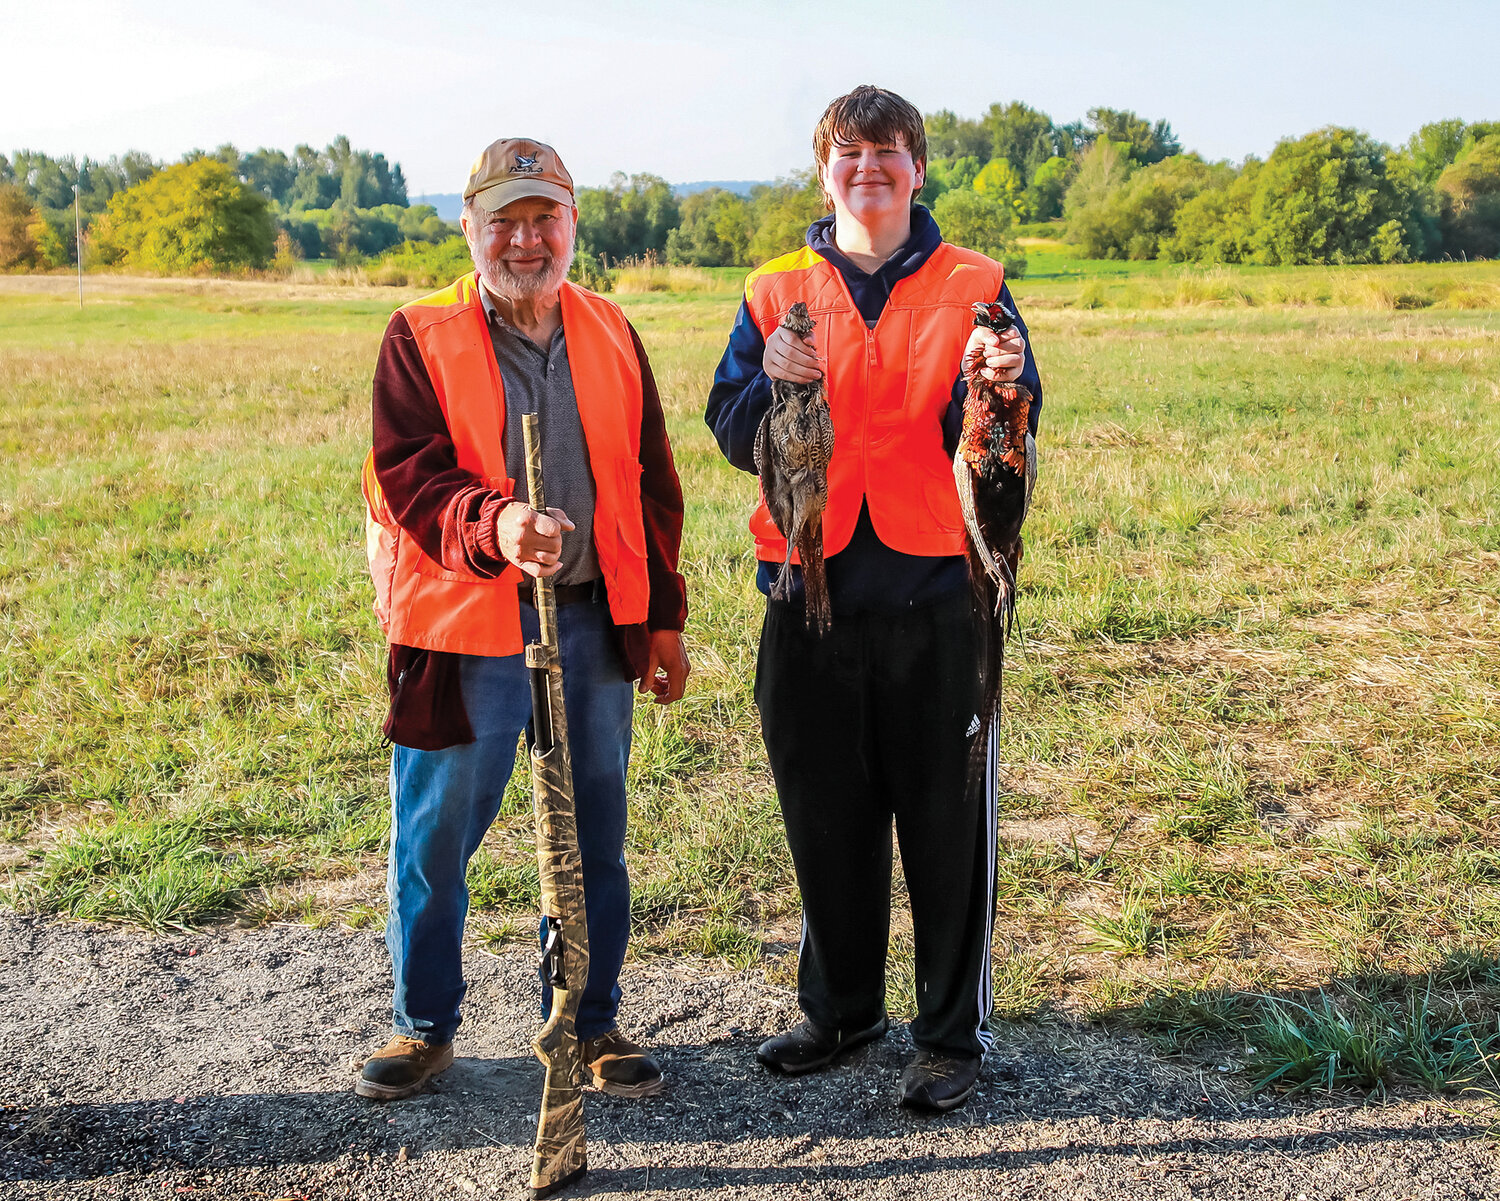 Wyatt Johnson (right), 14, from Kelso, stands with Fred Shroder, 79, from Vancouver, after their successful hunt where Johnson shot two pheasants in the first hour of the event on Saturday, Sept. 16.